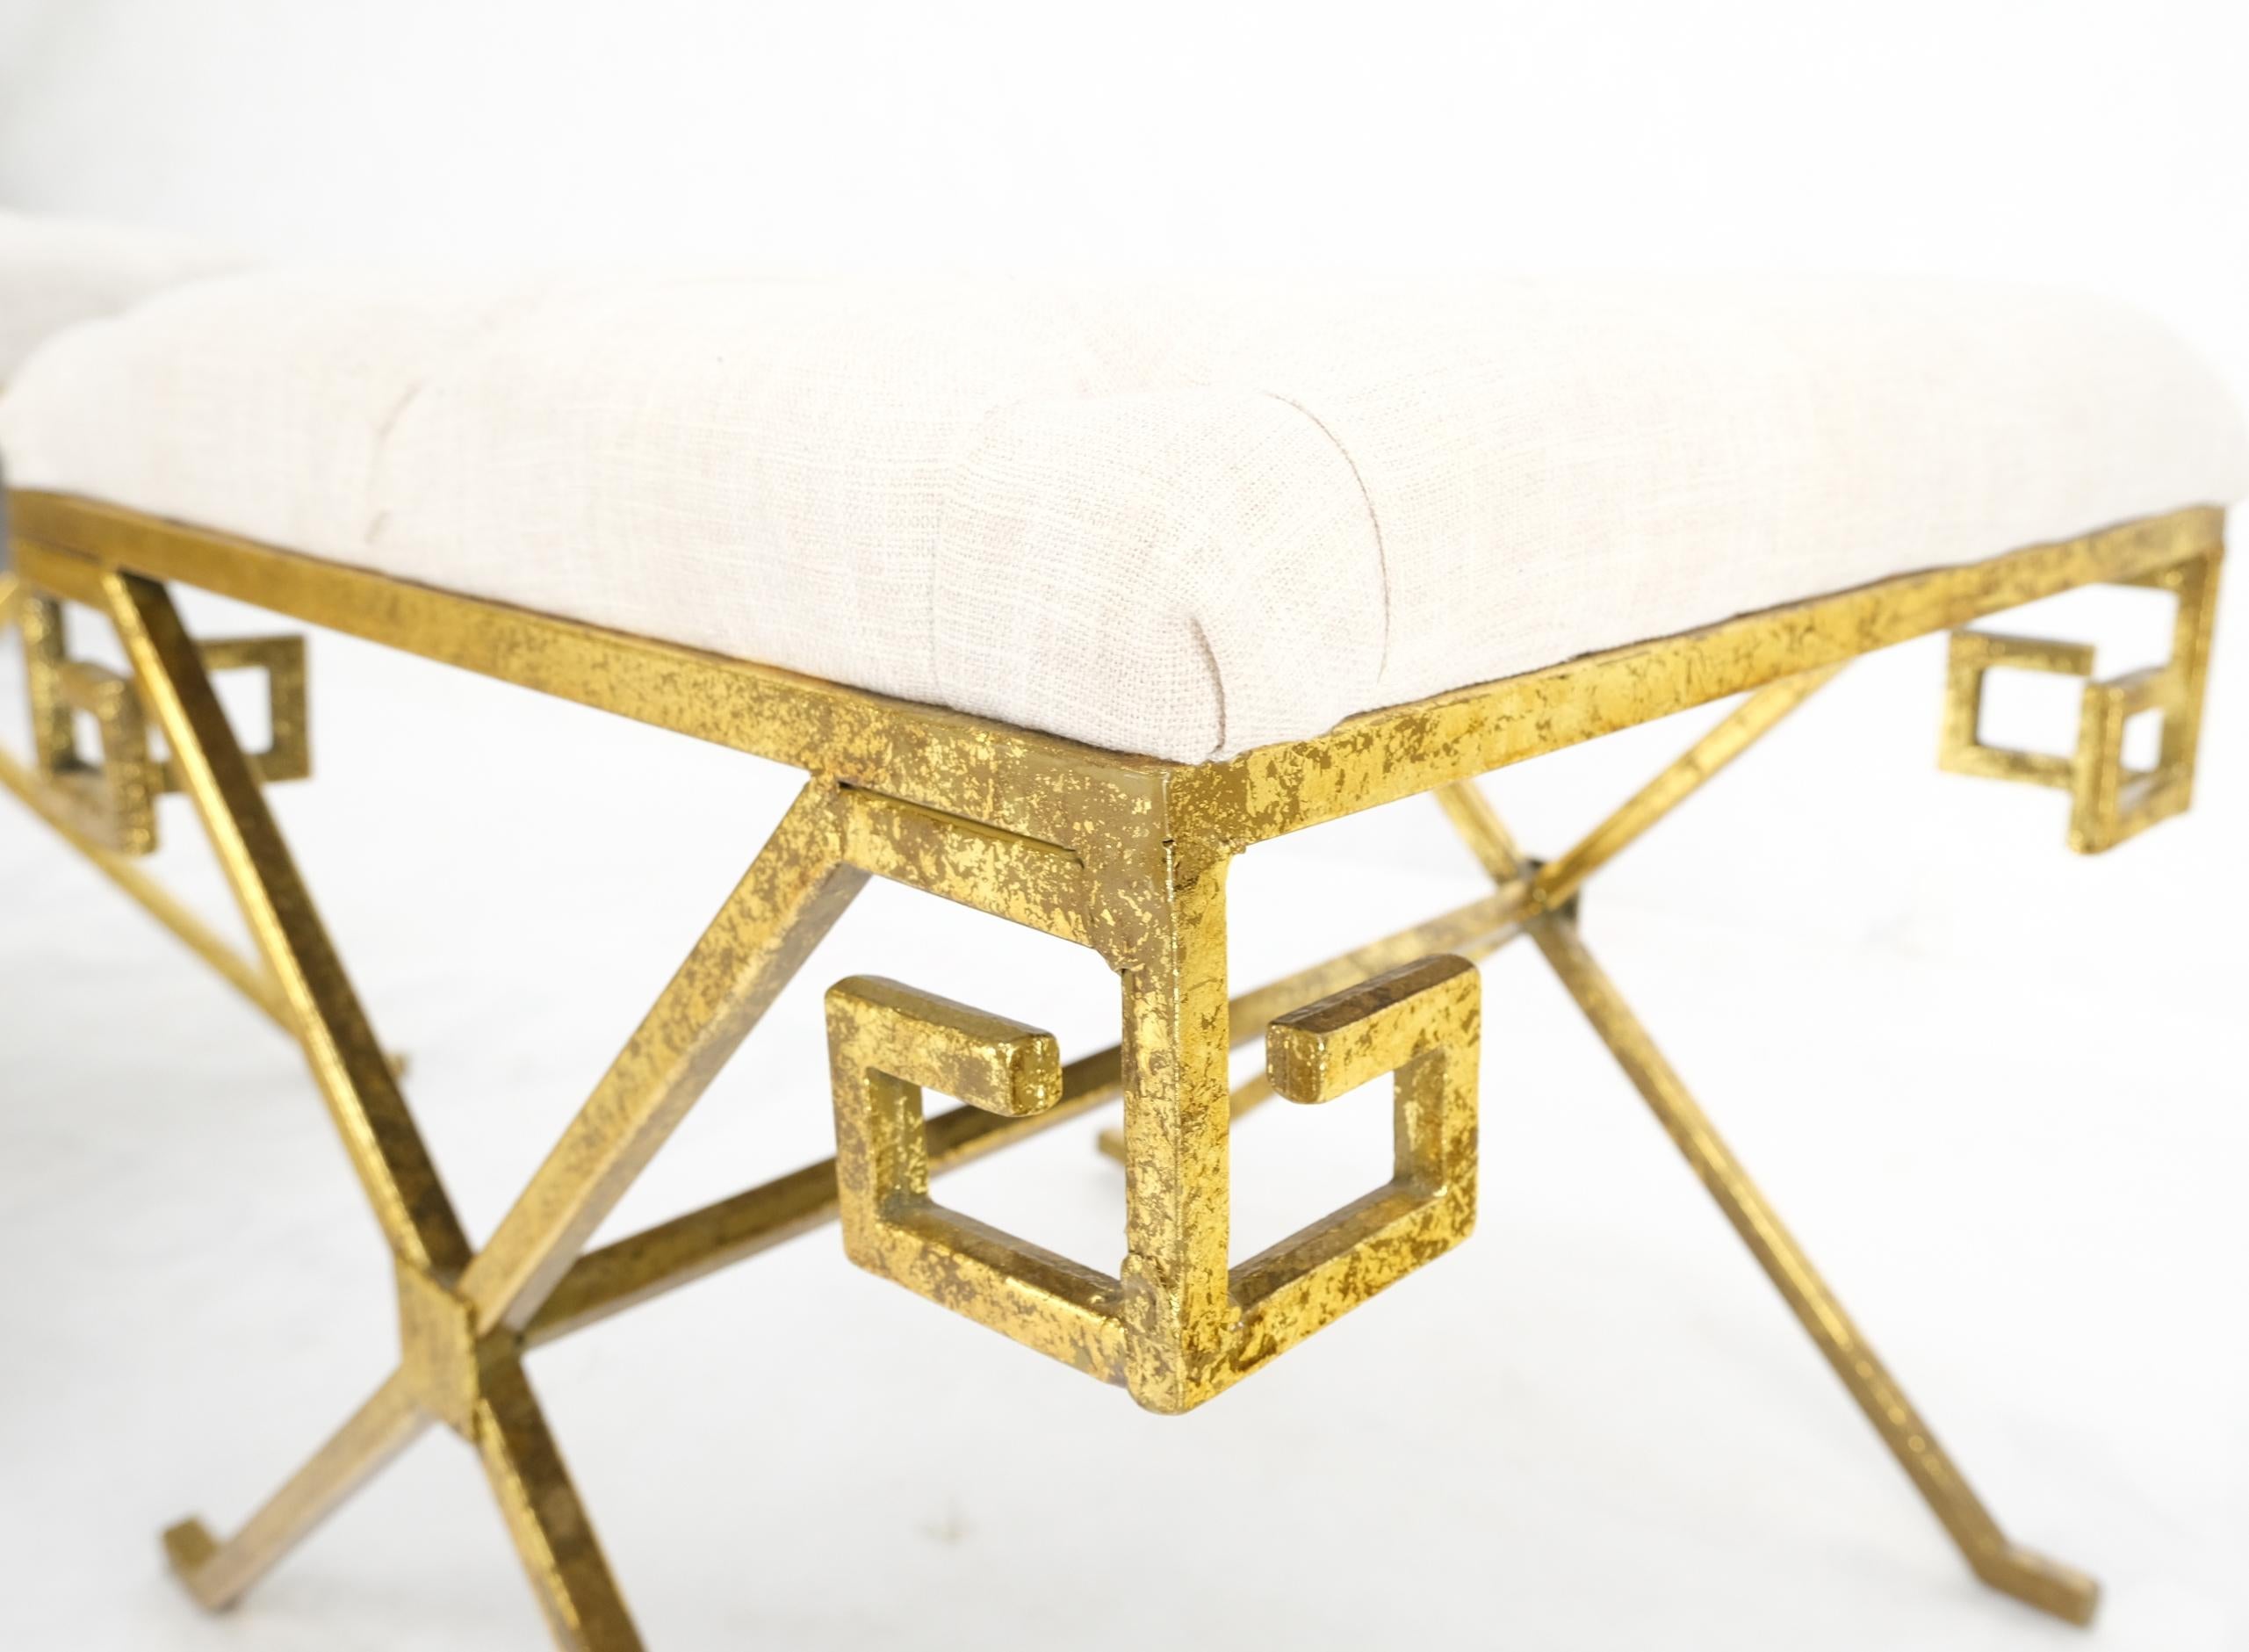 Tufted linen upholstery forged gold gilt steel pair of square x-base Greek key motive benches.